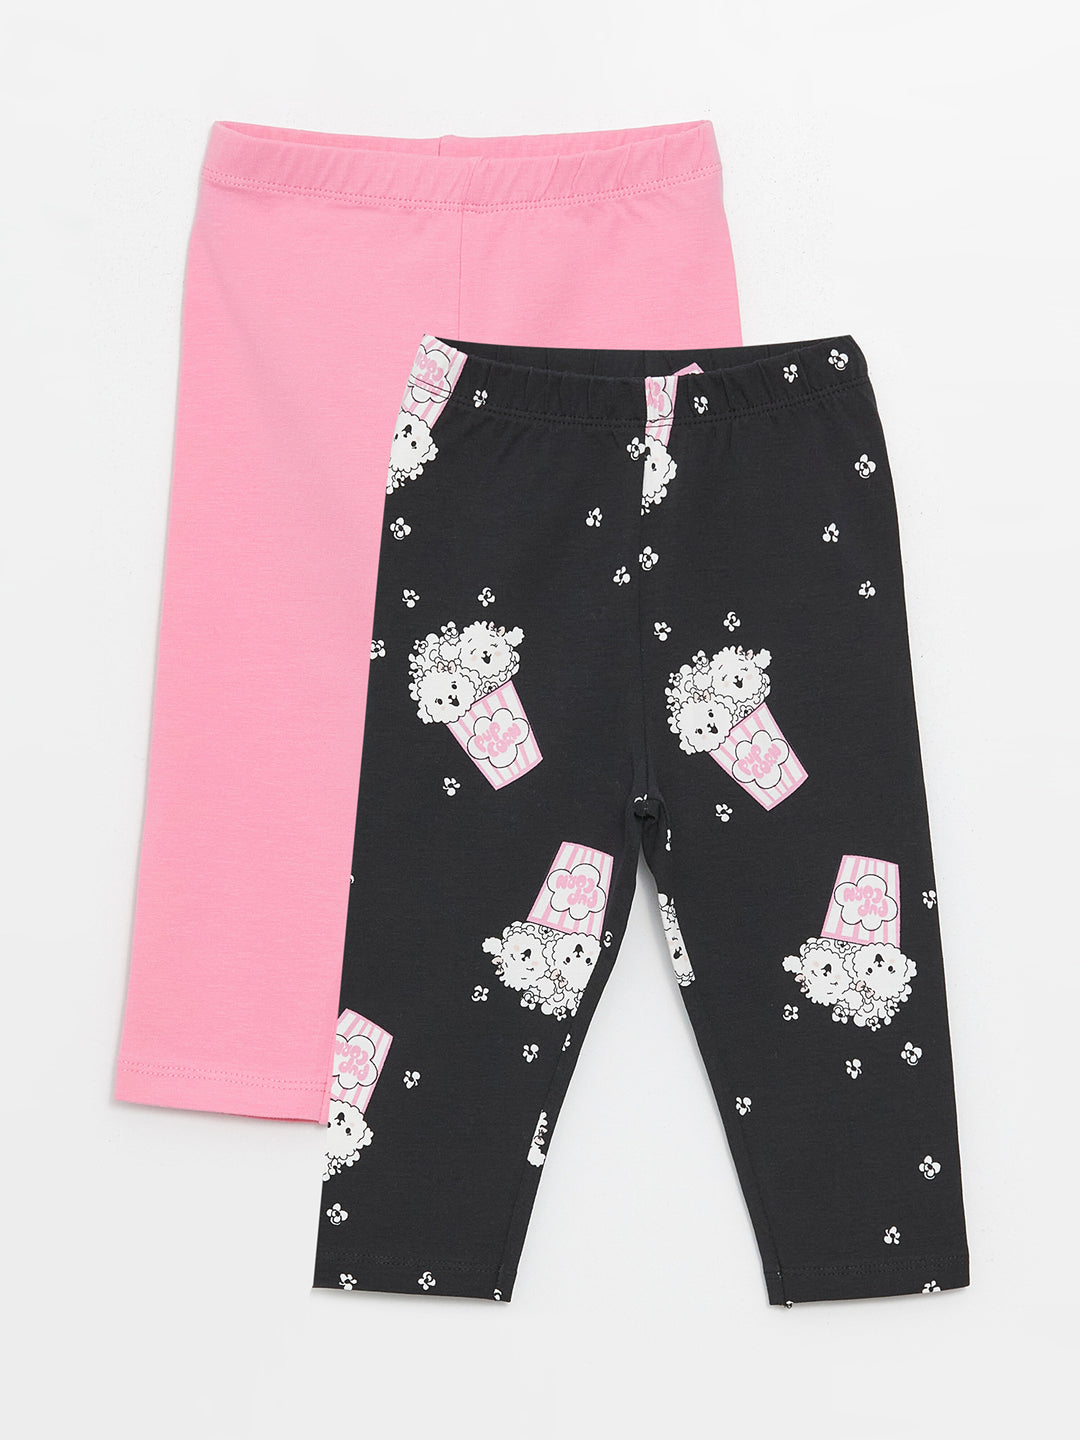 Printed Baby Girl Tights with Elastic Waist, 2 Pack